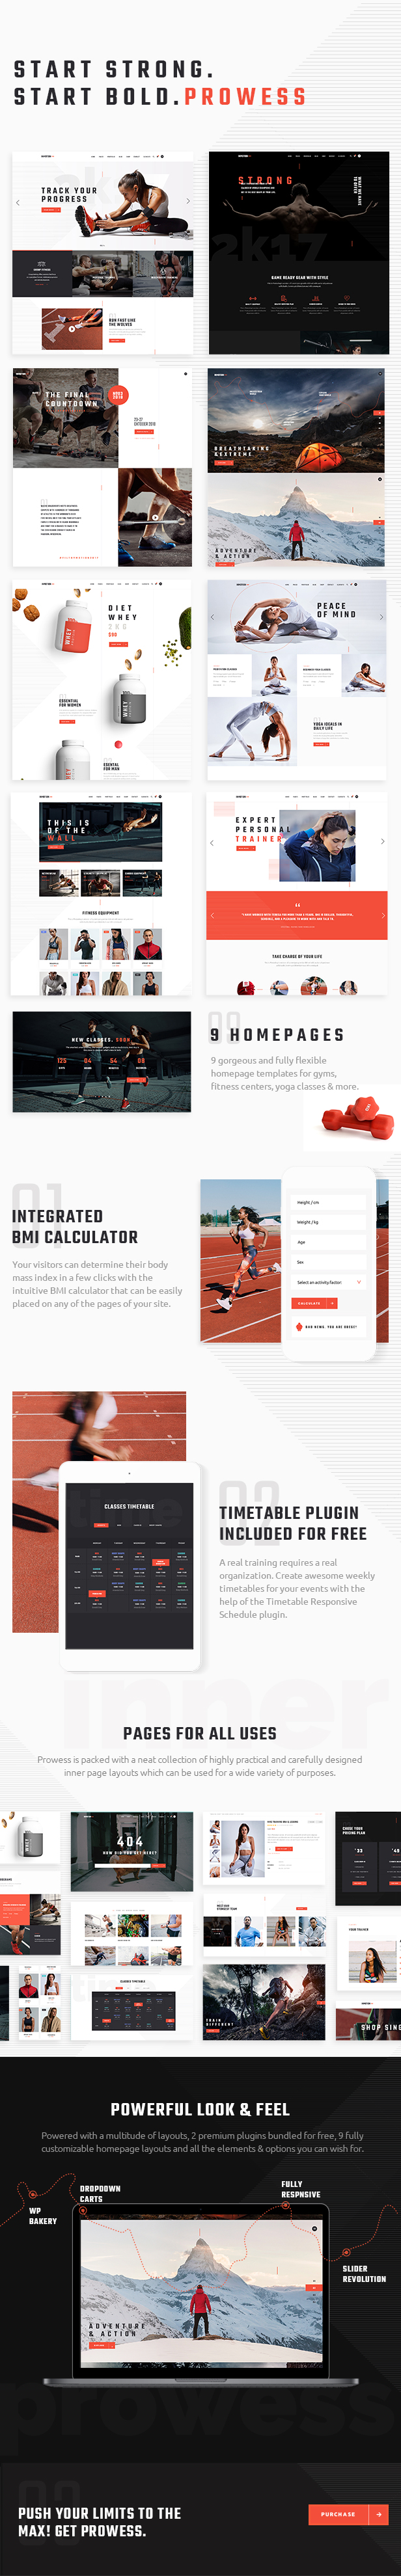 Prowess - Fitness and Gym WordPress Theme - 3